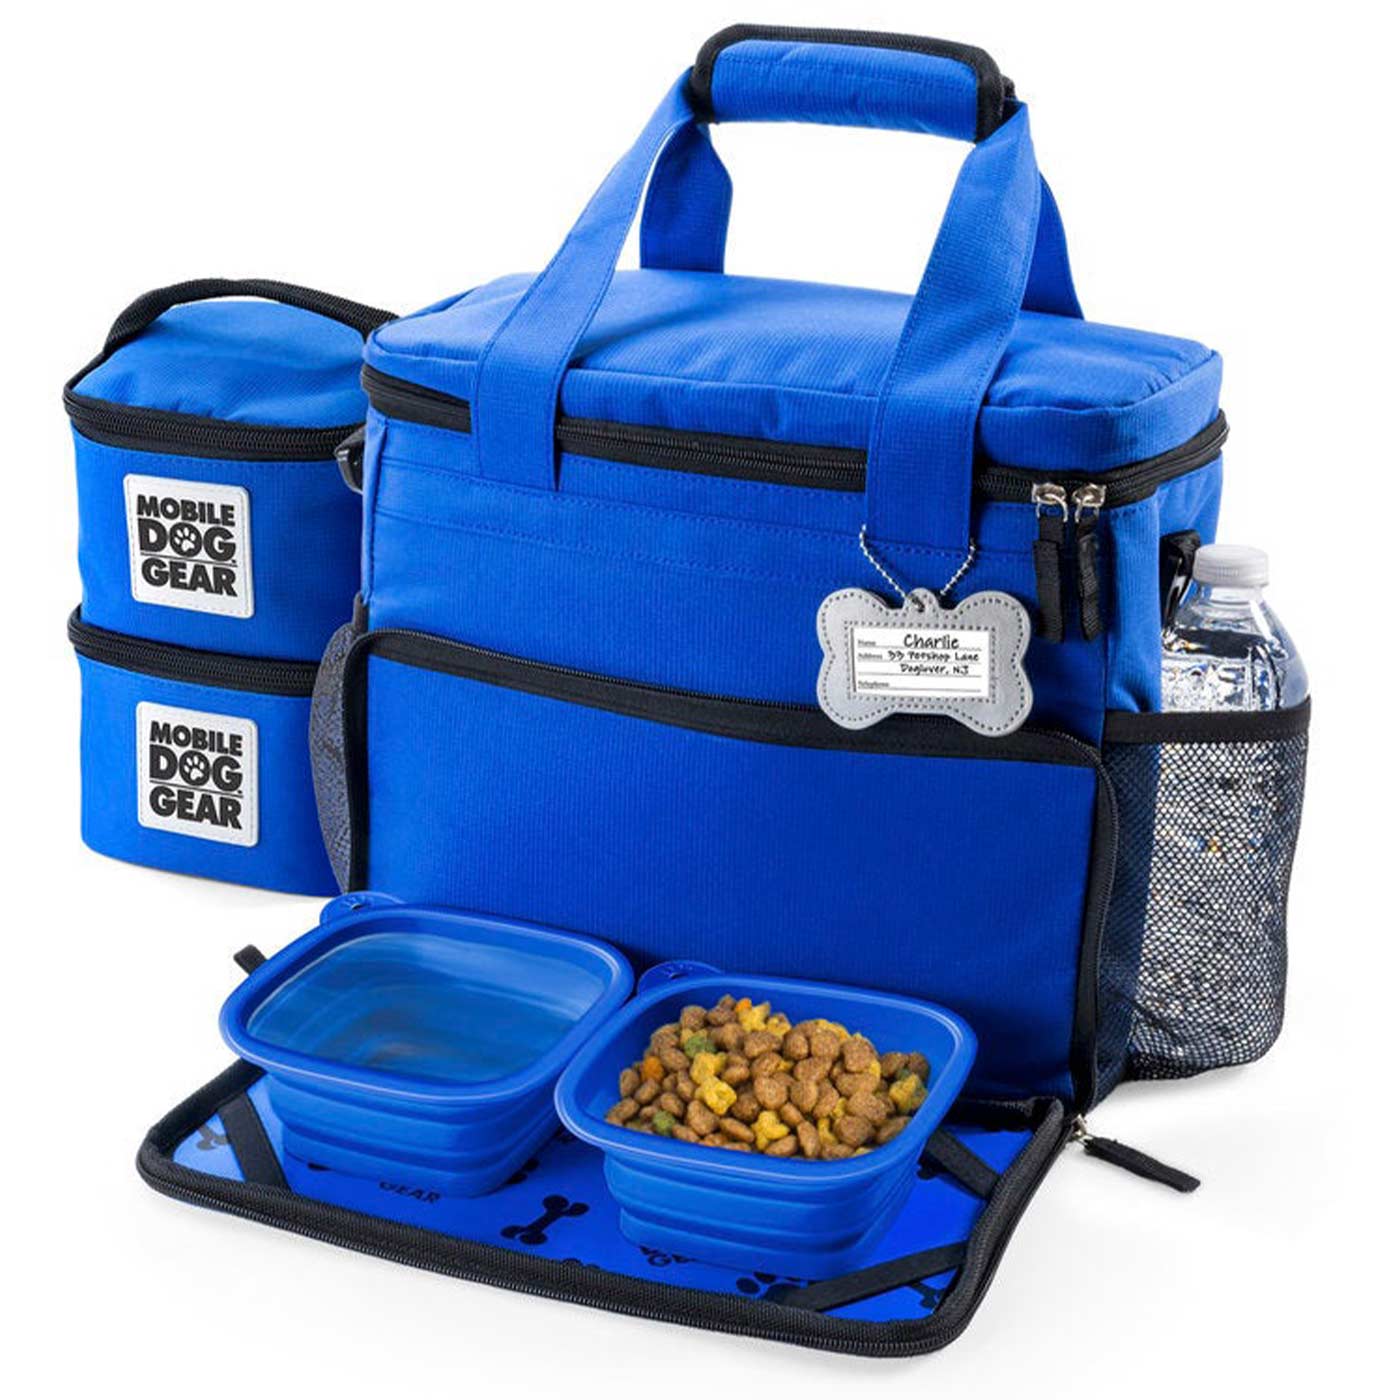 Discover, Mobile Dog Gear Week Away Bag, in Blue. The Perfect Away Bag for any Pet Parent, Featuring dividers to stack food and built in waste bag dispenser. Also Included feeding set, collapsible silicone bowls and placemat! The Perfect Gift For travel, meets airline requirements. Available Now at Lords & Labradors